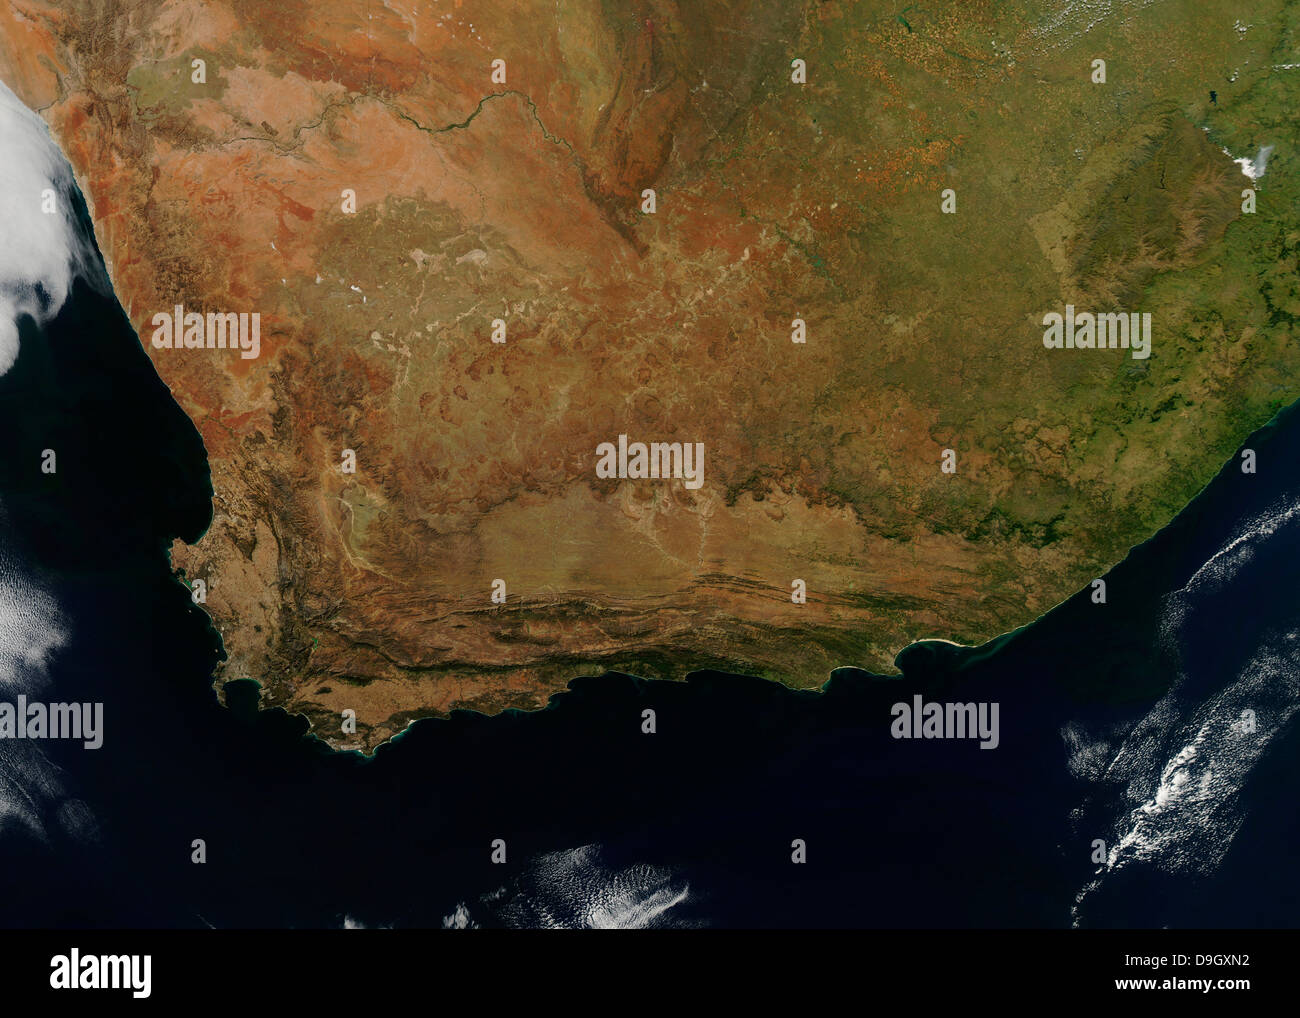 April 12, 2010 - Satellite view of South Africa. Stock Photo